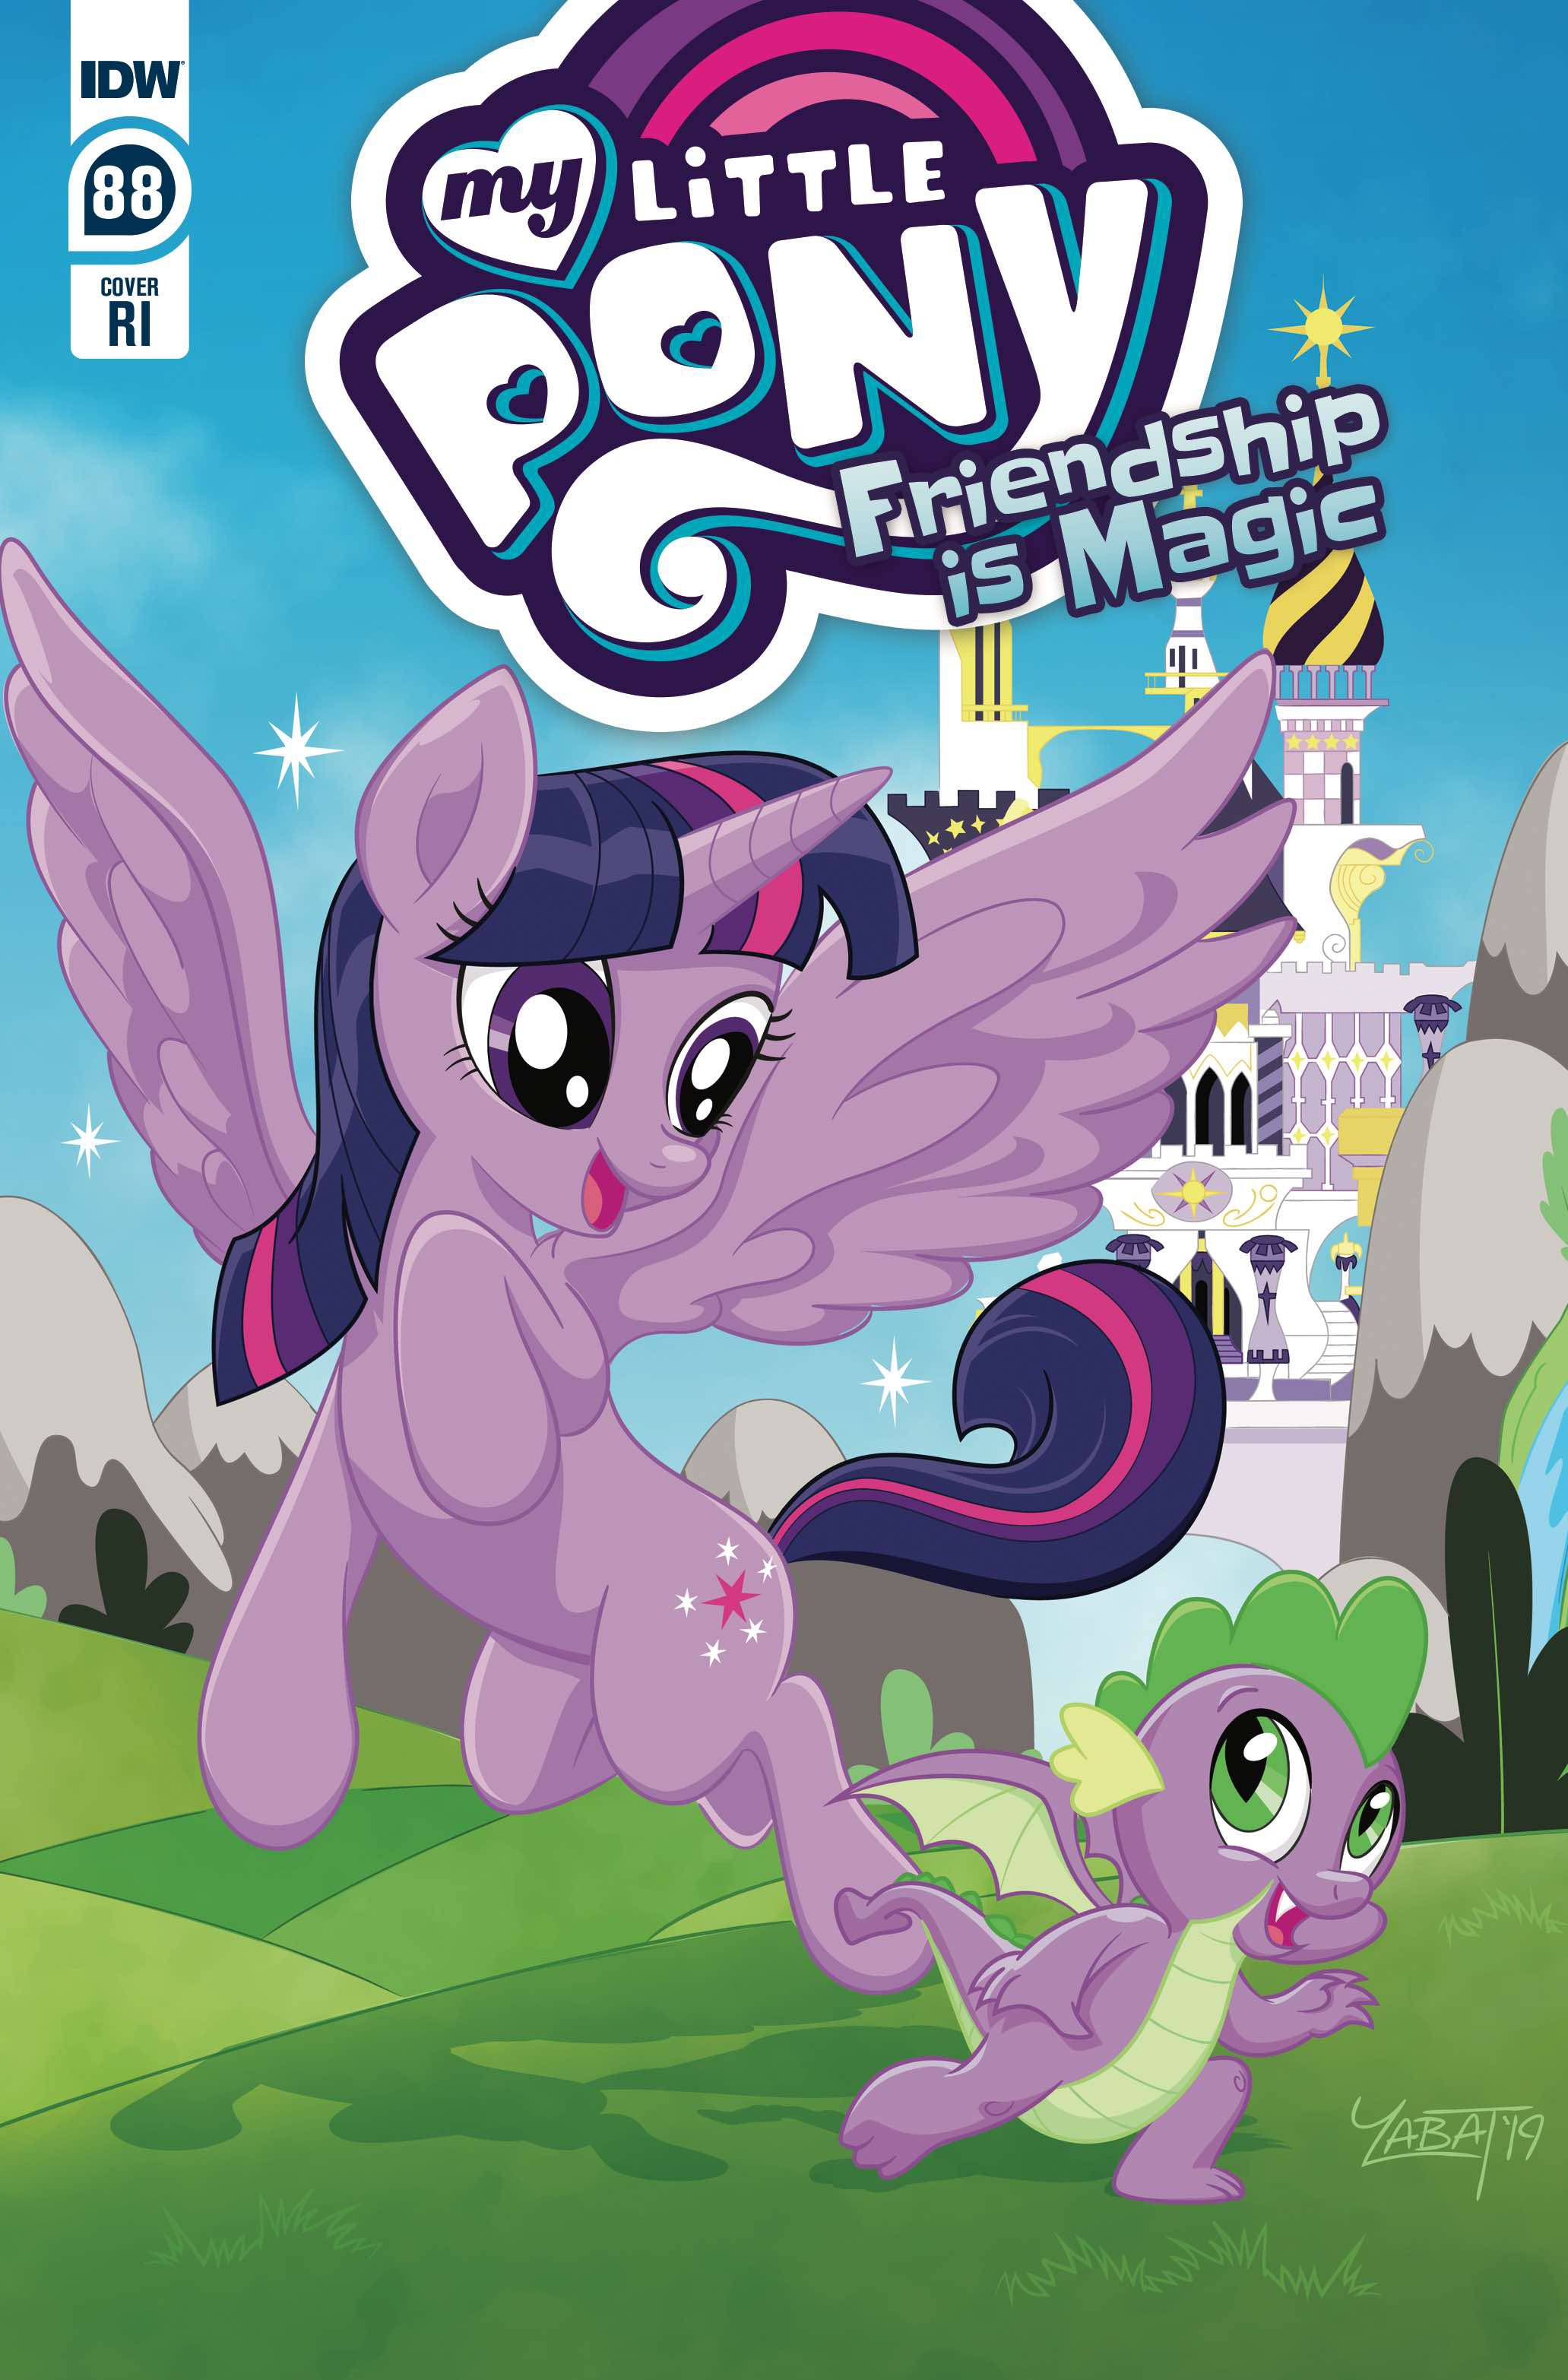 My Little Pony Friendship Is Magic #88 1 for 10 Incentive Labat